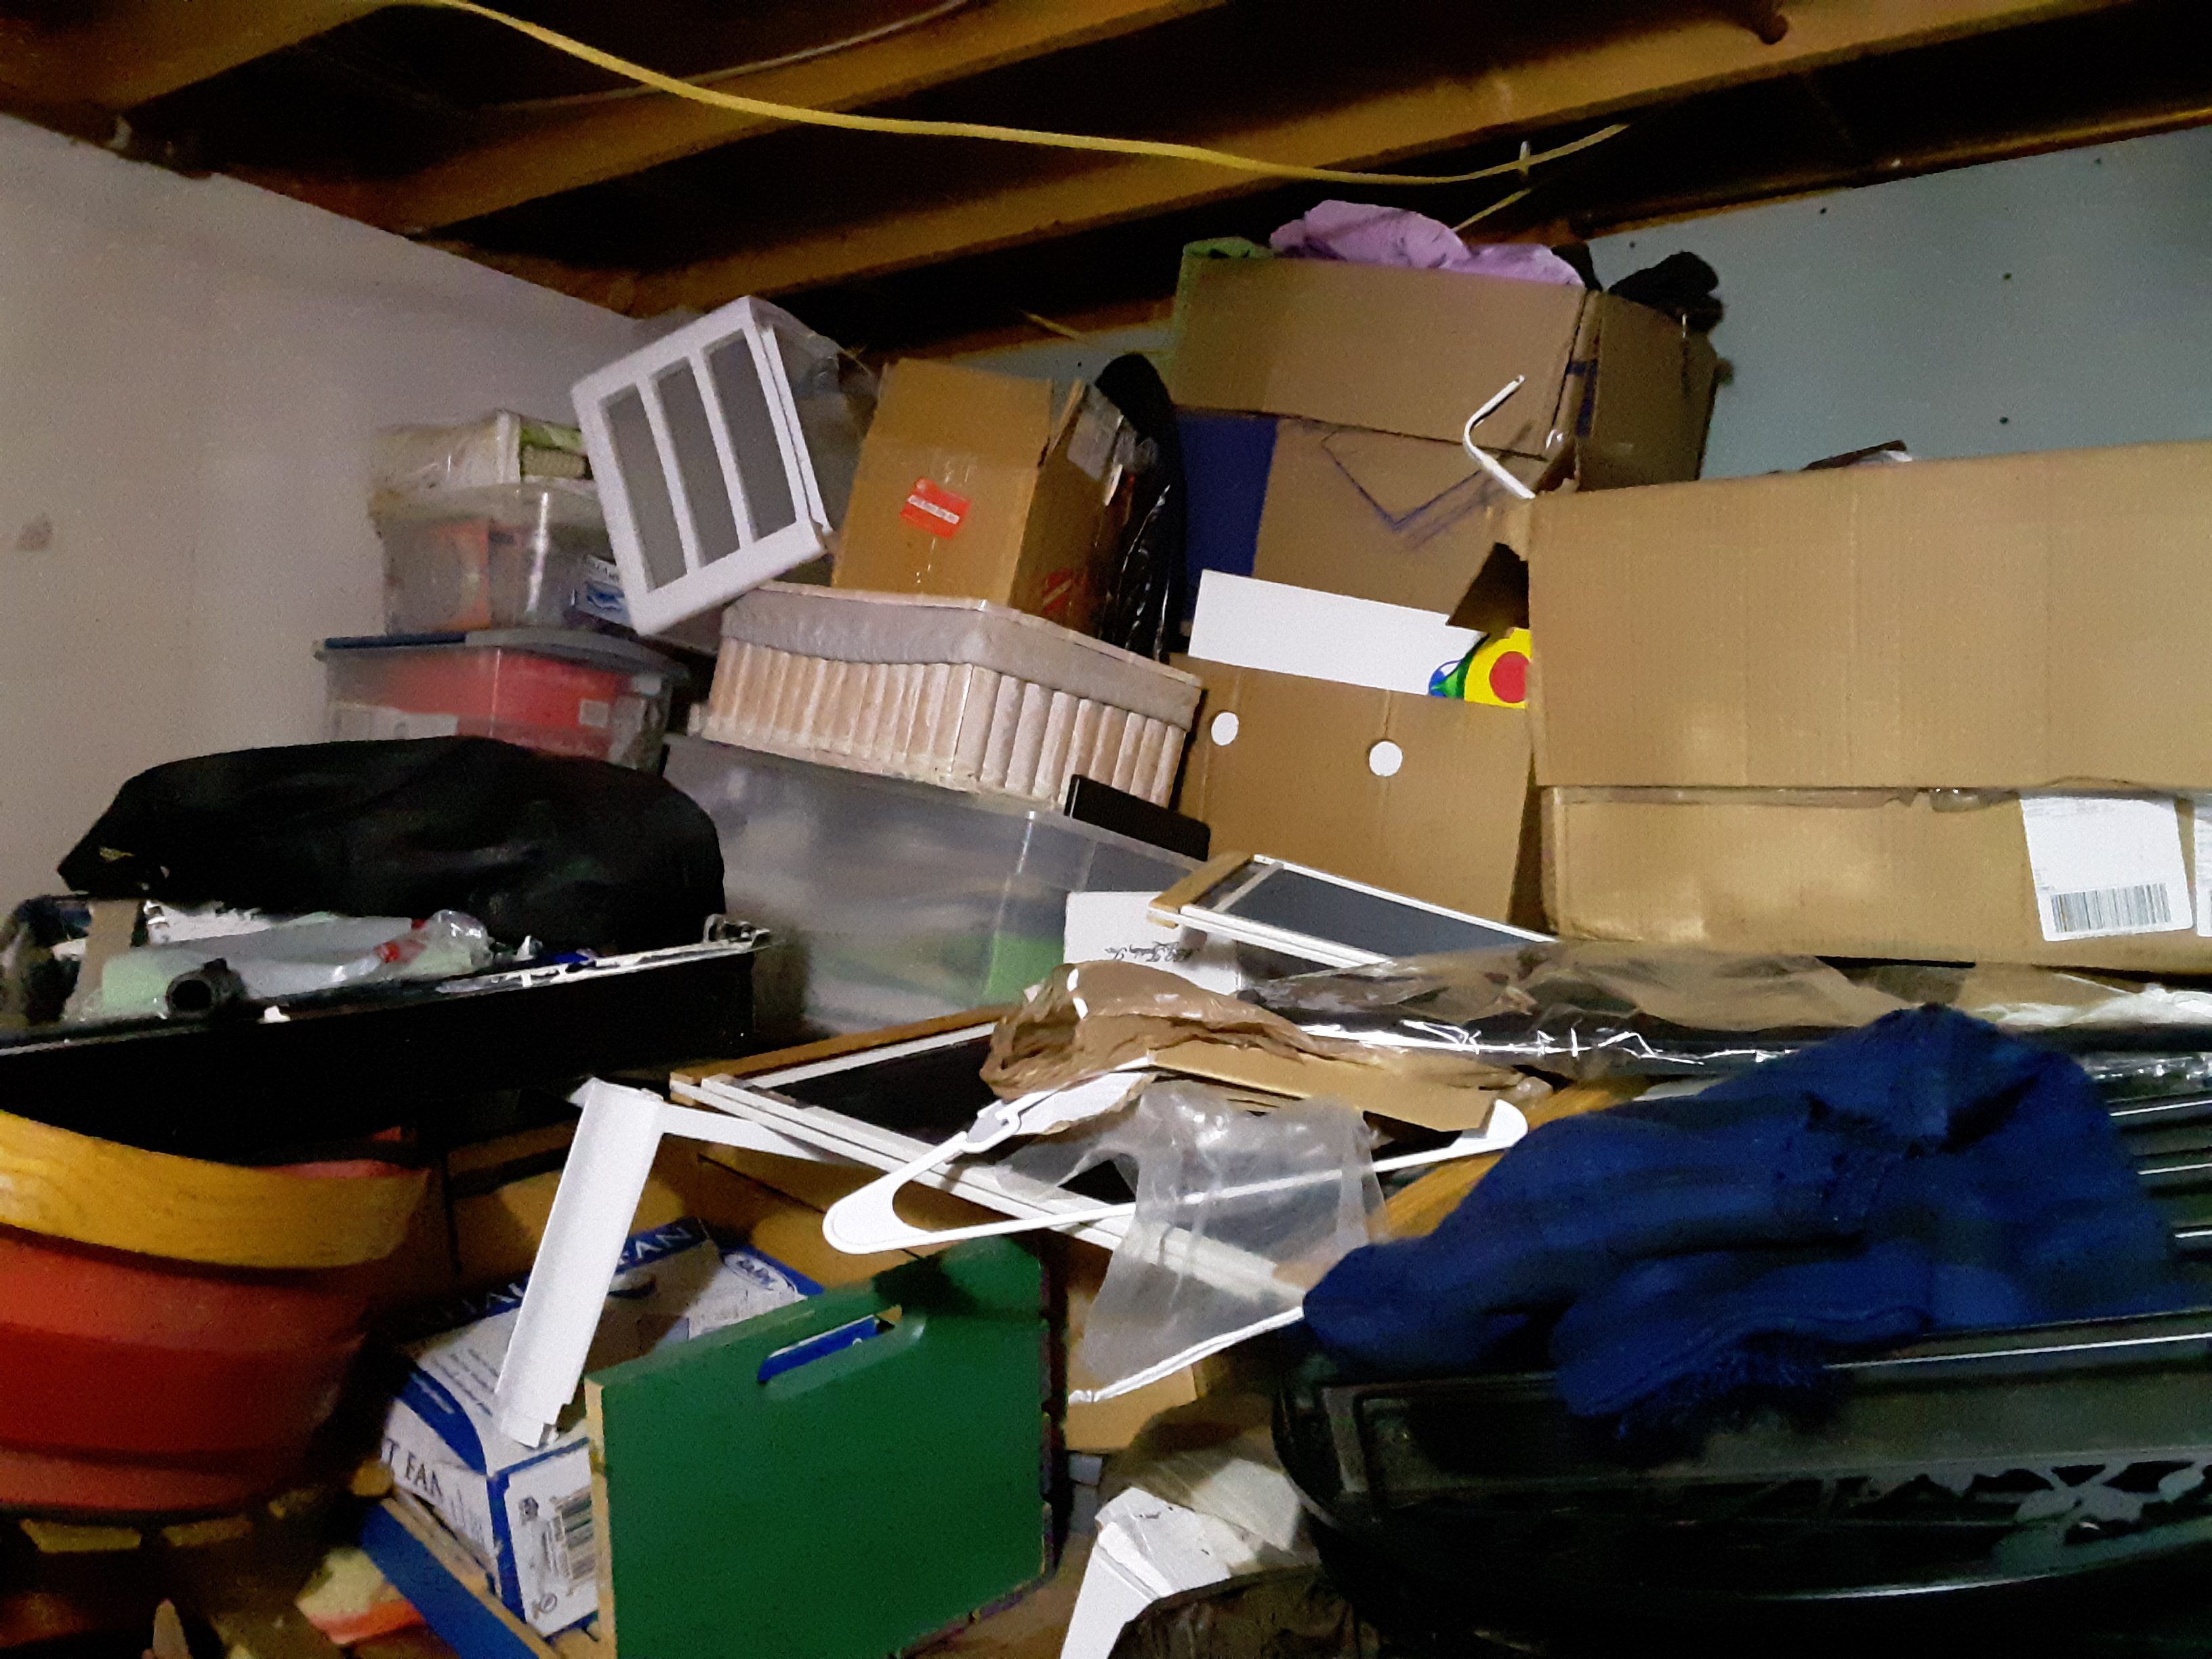 Lots of corner clutter before we cleared it!